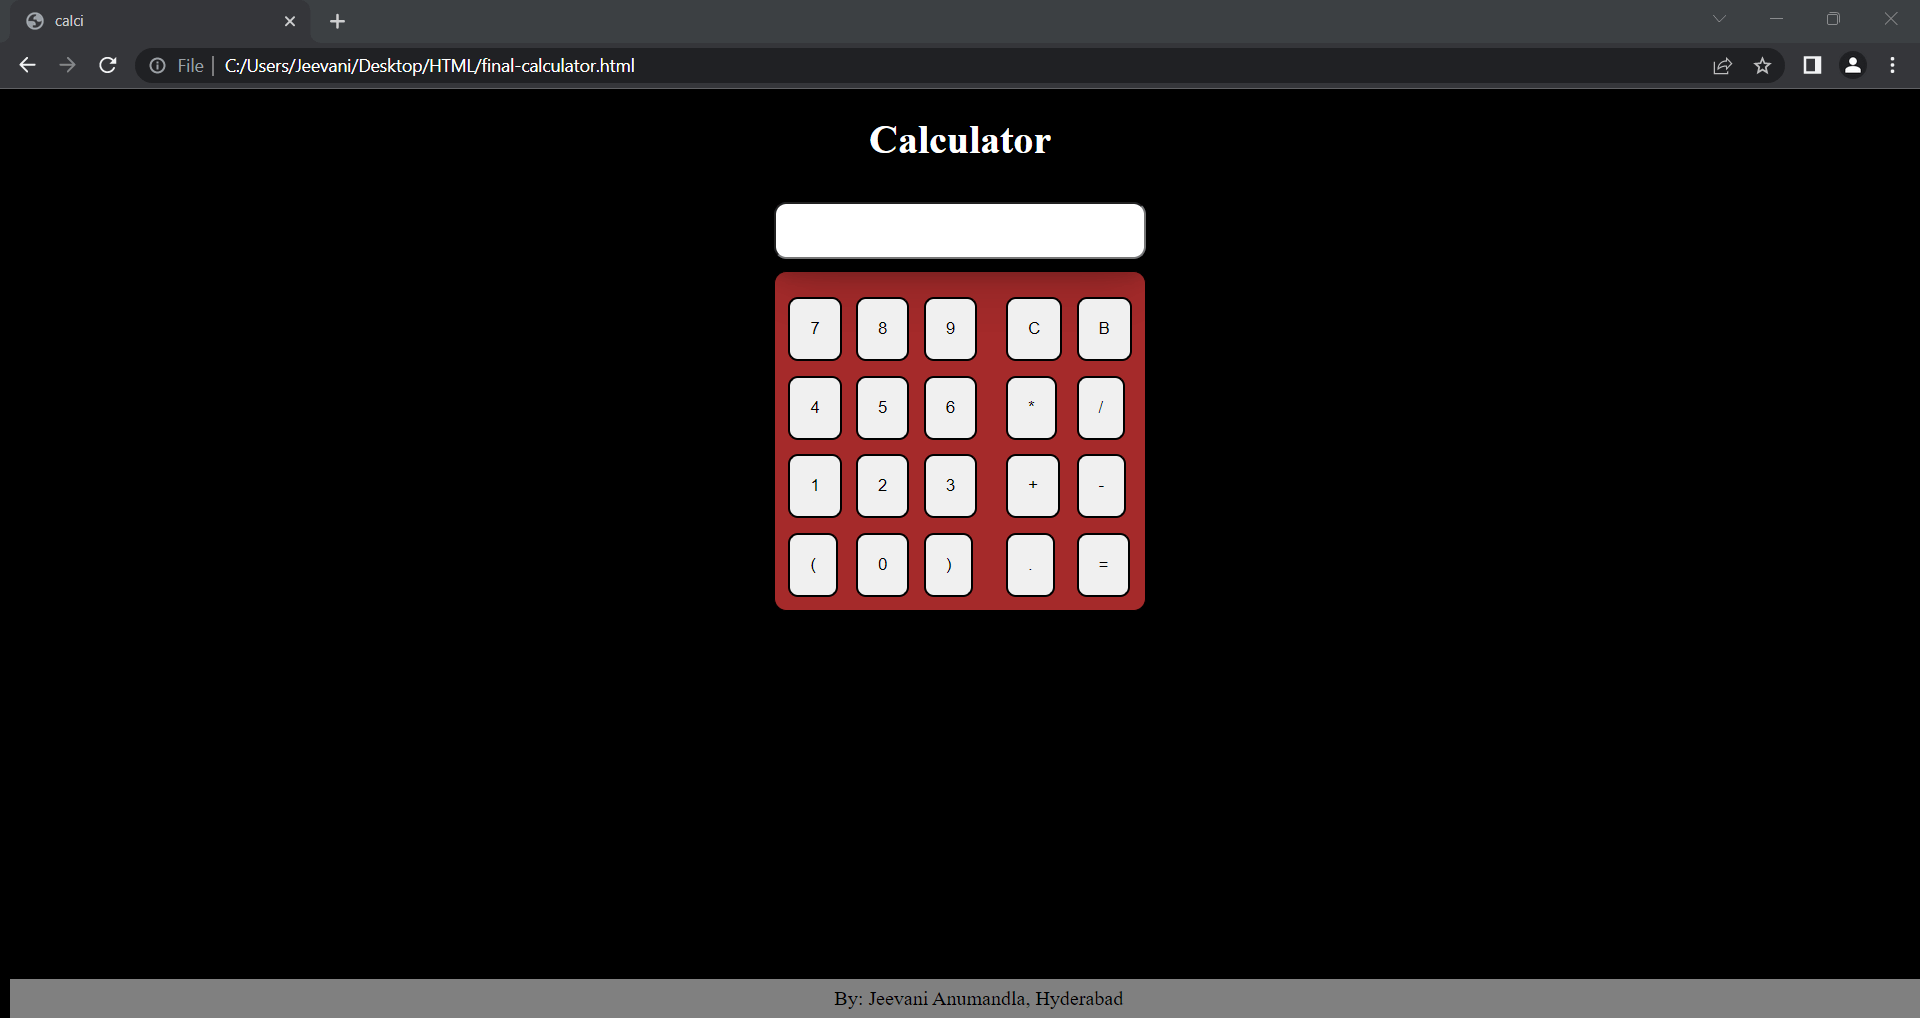 Different ways to build a calculator in HTML using JavaScript